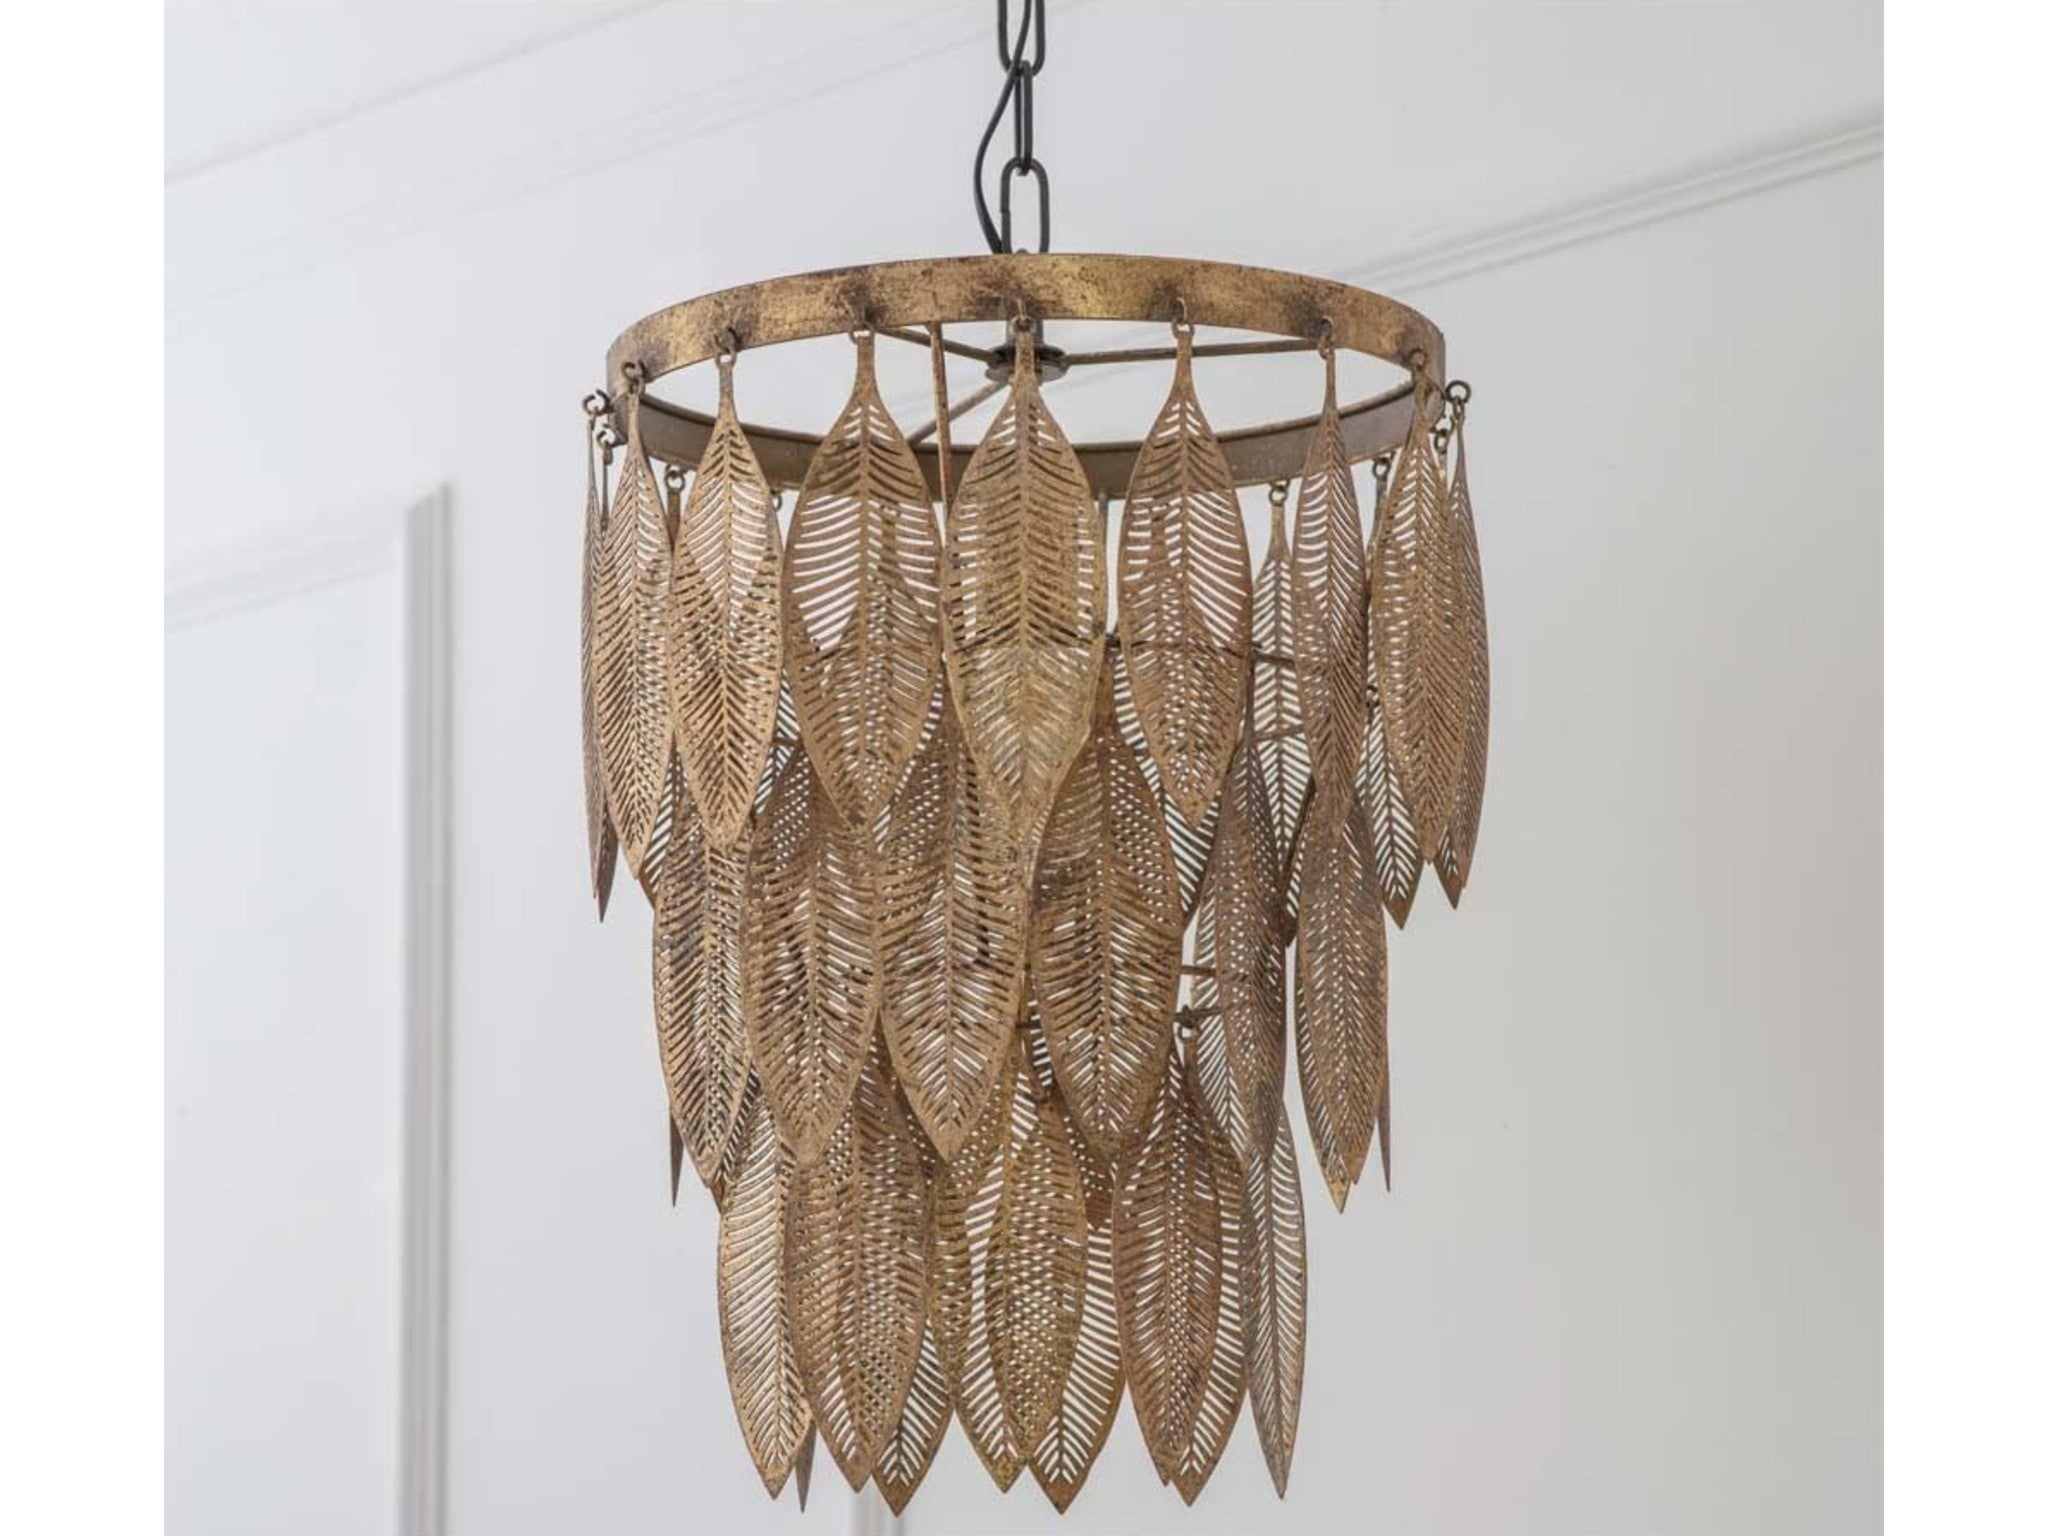 The French Bedroom Company autumn leaves pendant light  indybest.jpeg